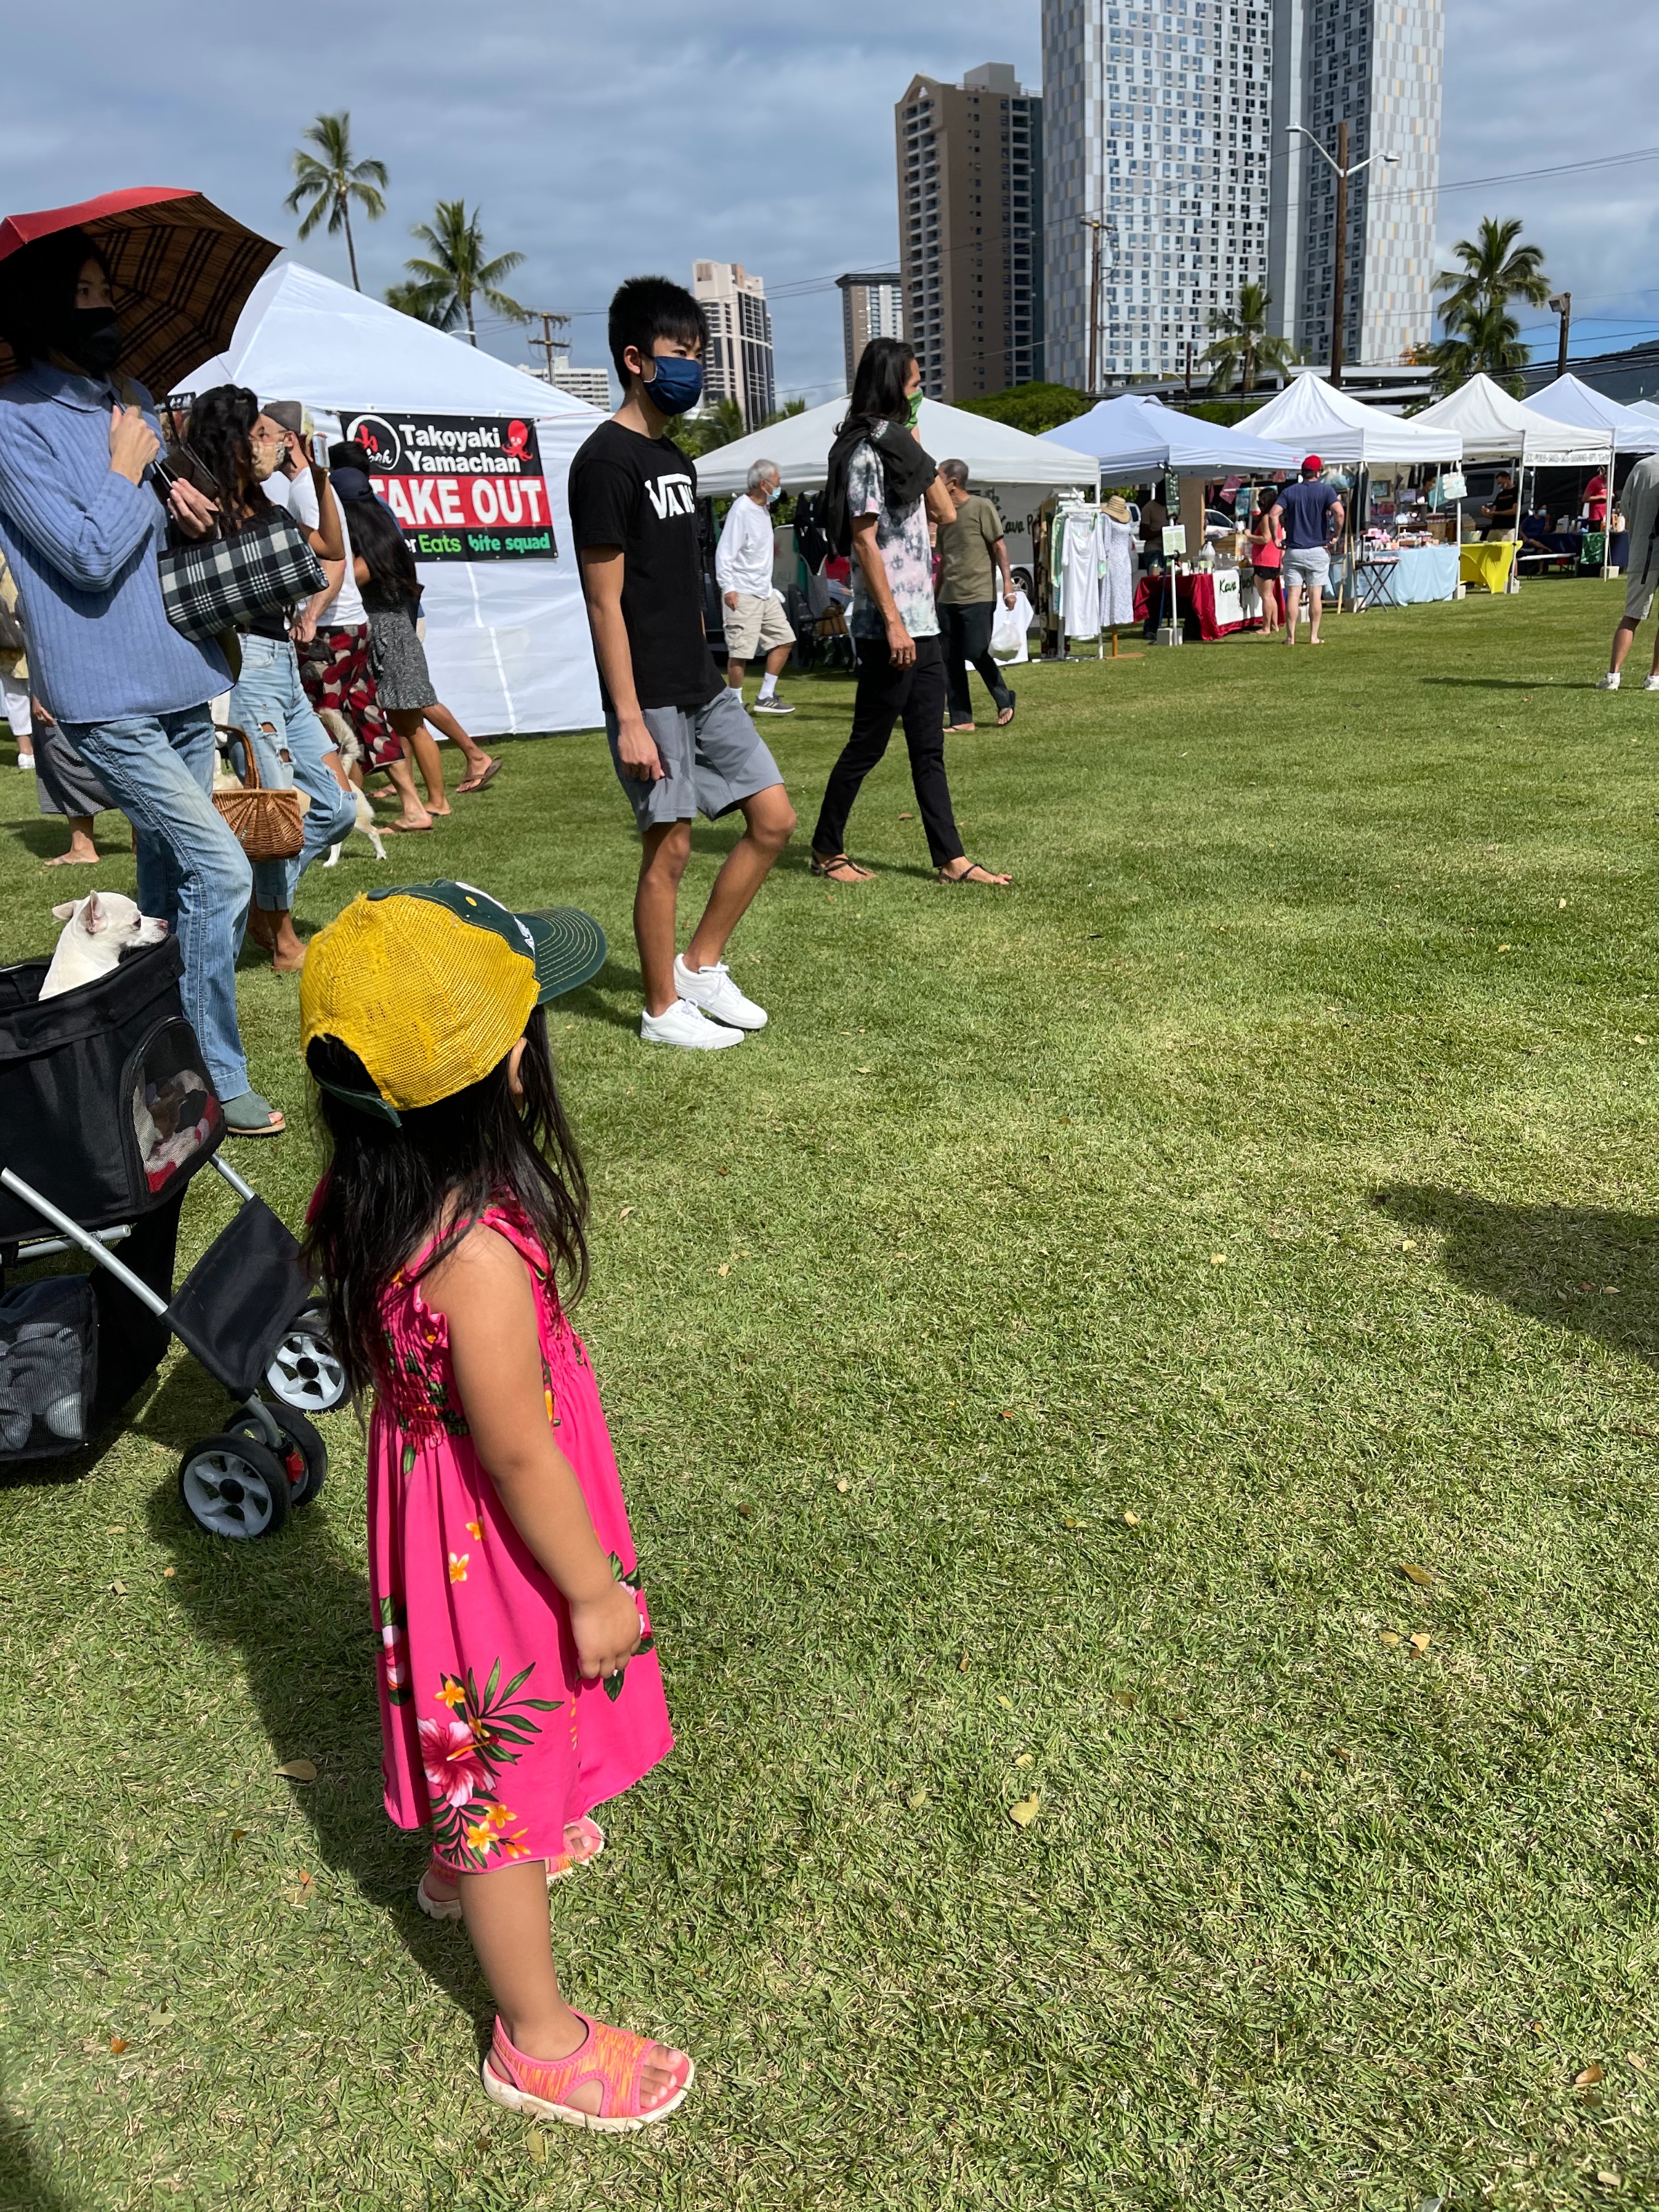 A child in a pink dress and yellow hat looks out into a field of farmers market tents and booths.